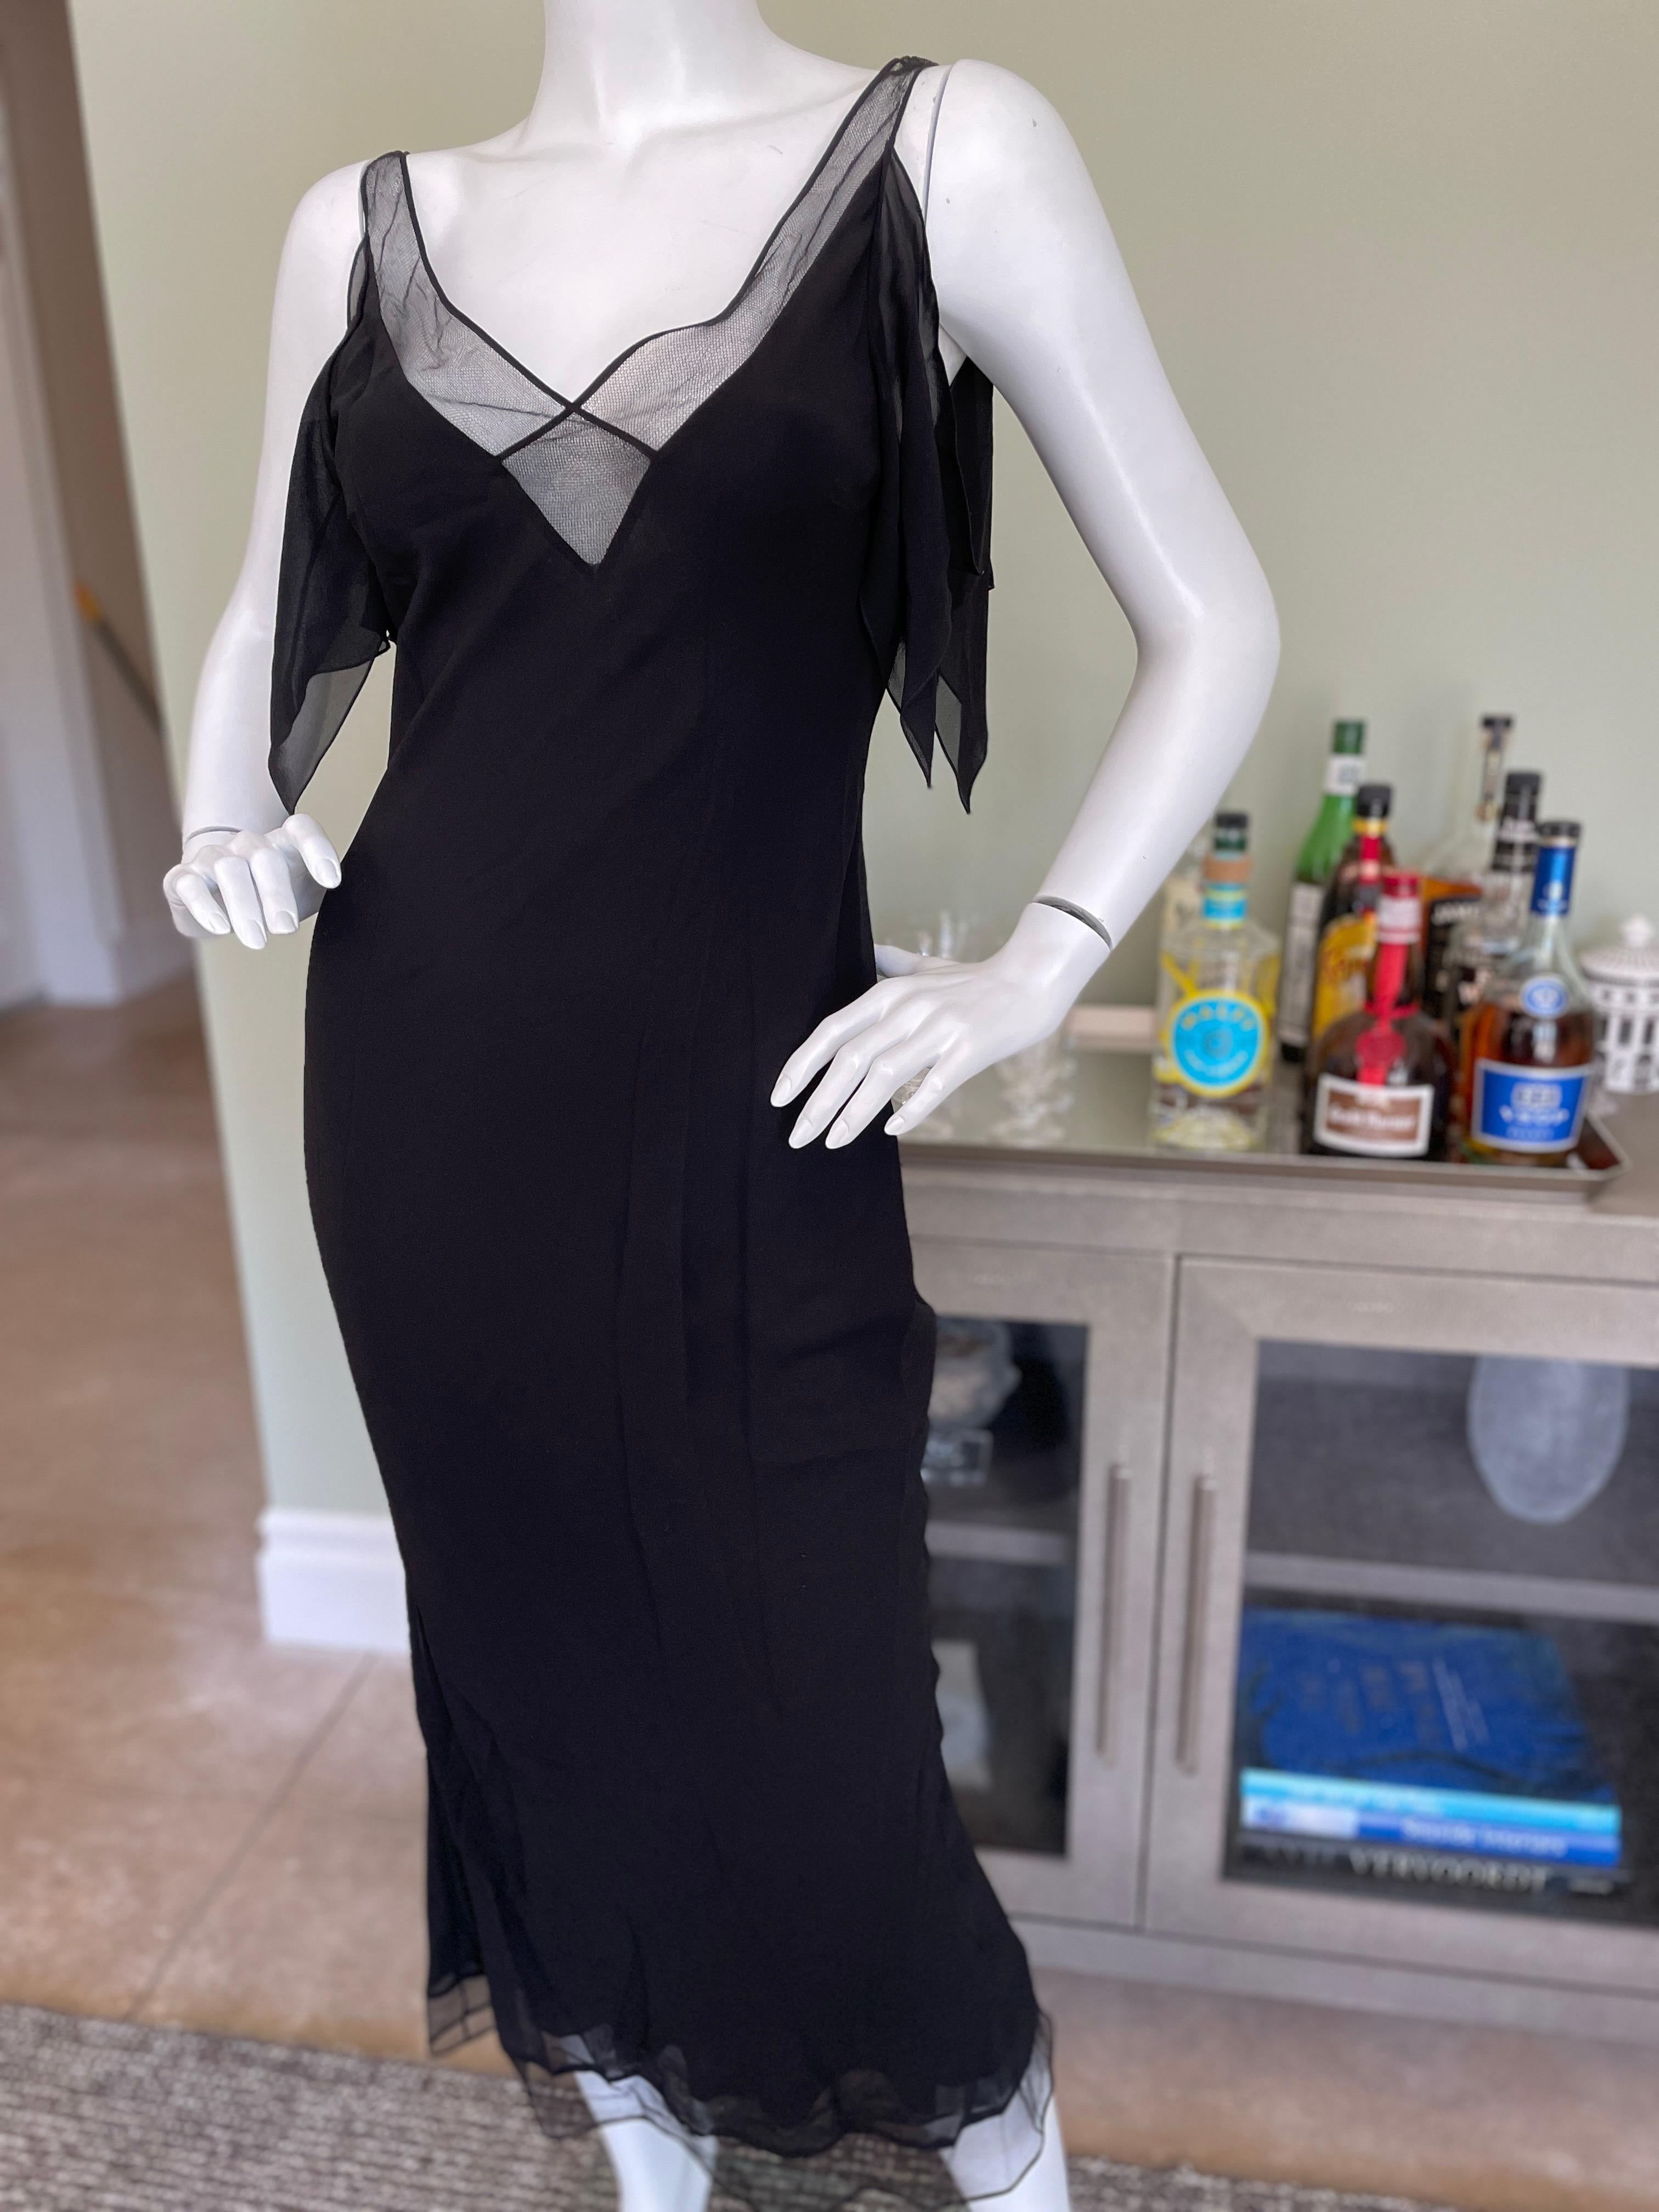  John Galliano 1999 Bias Cut Little Black Dress w Mesh Inserts & Flutter Sleeves In Good Condition For Sale In Cloverdale, CA